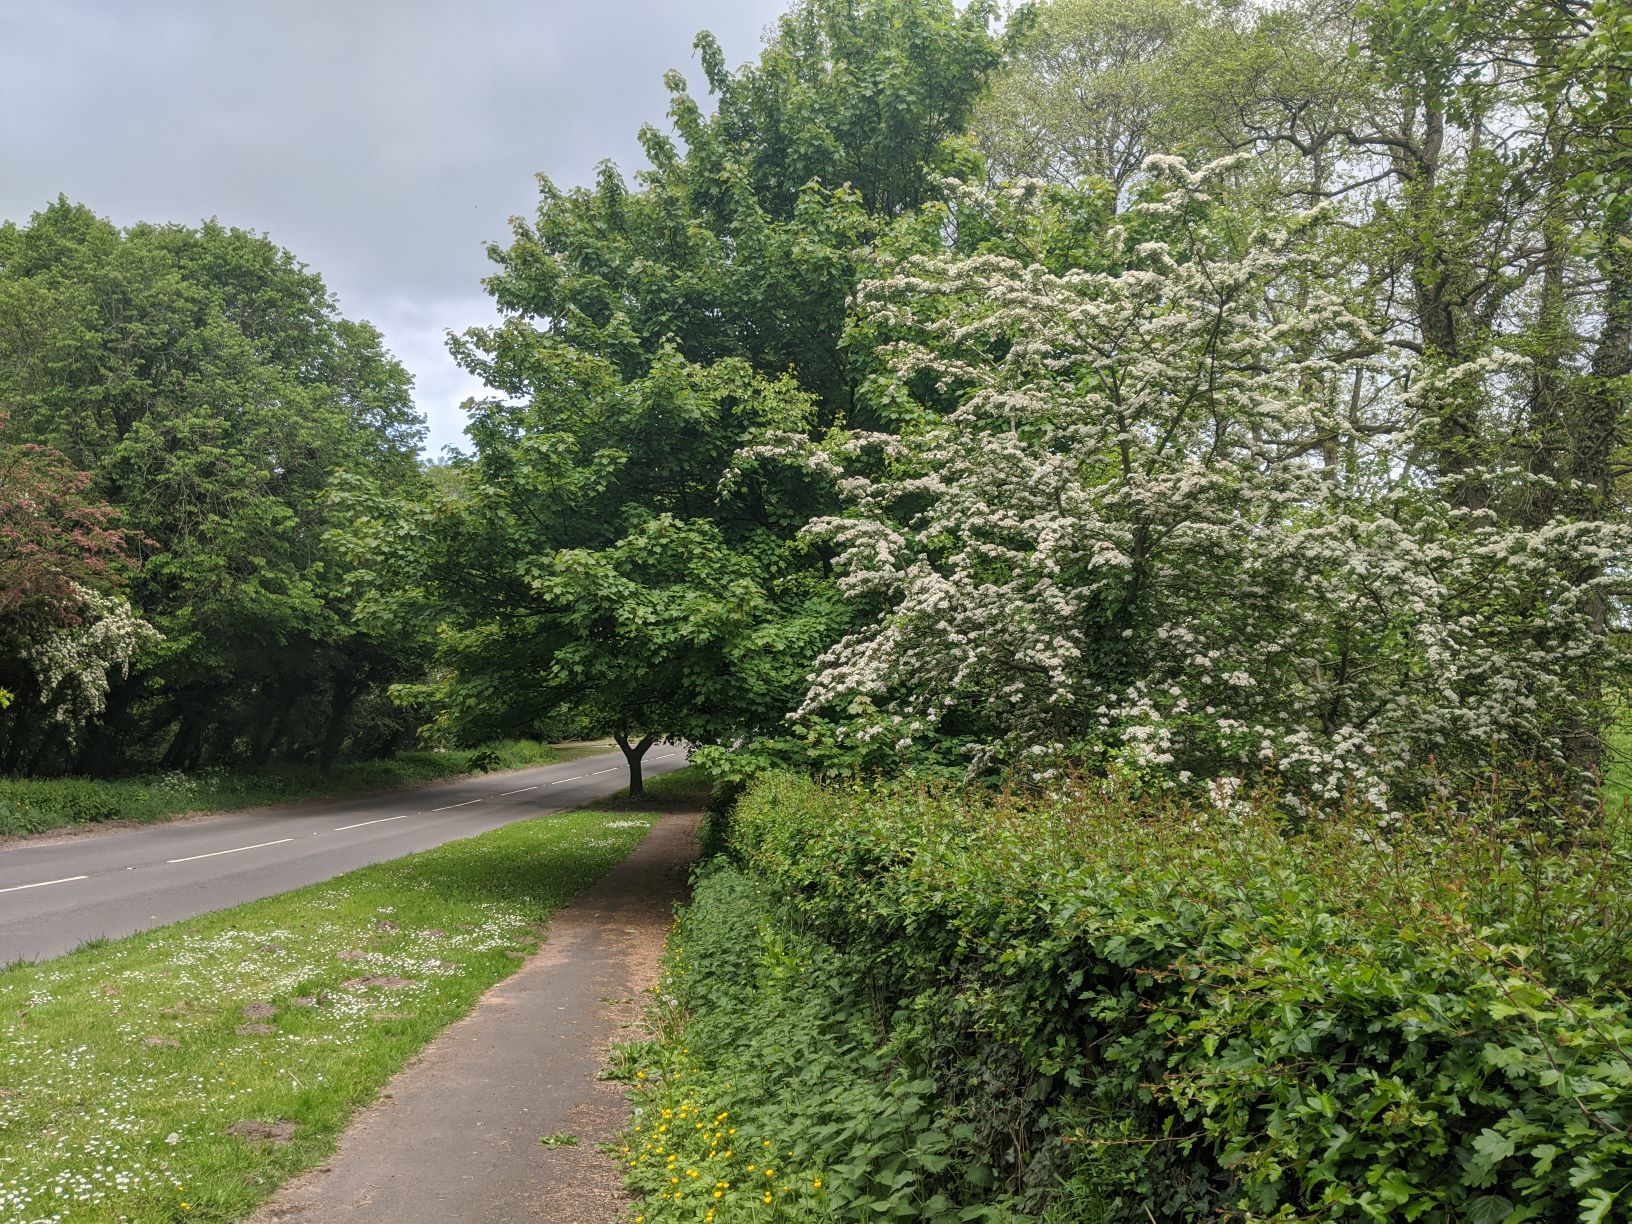 May blossom on the A529, May 22nd